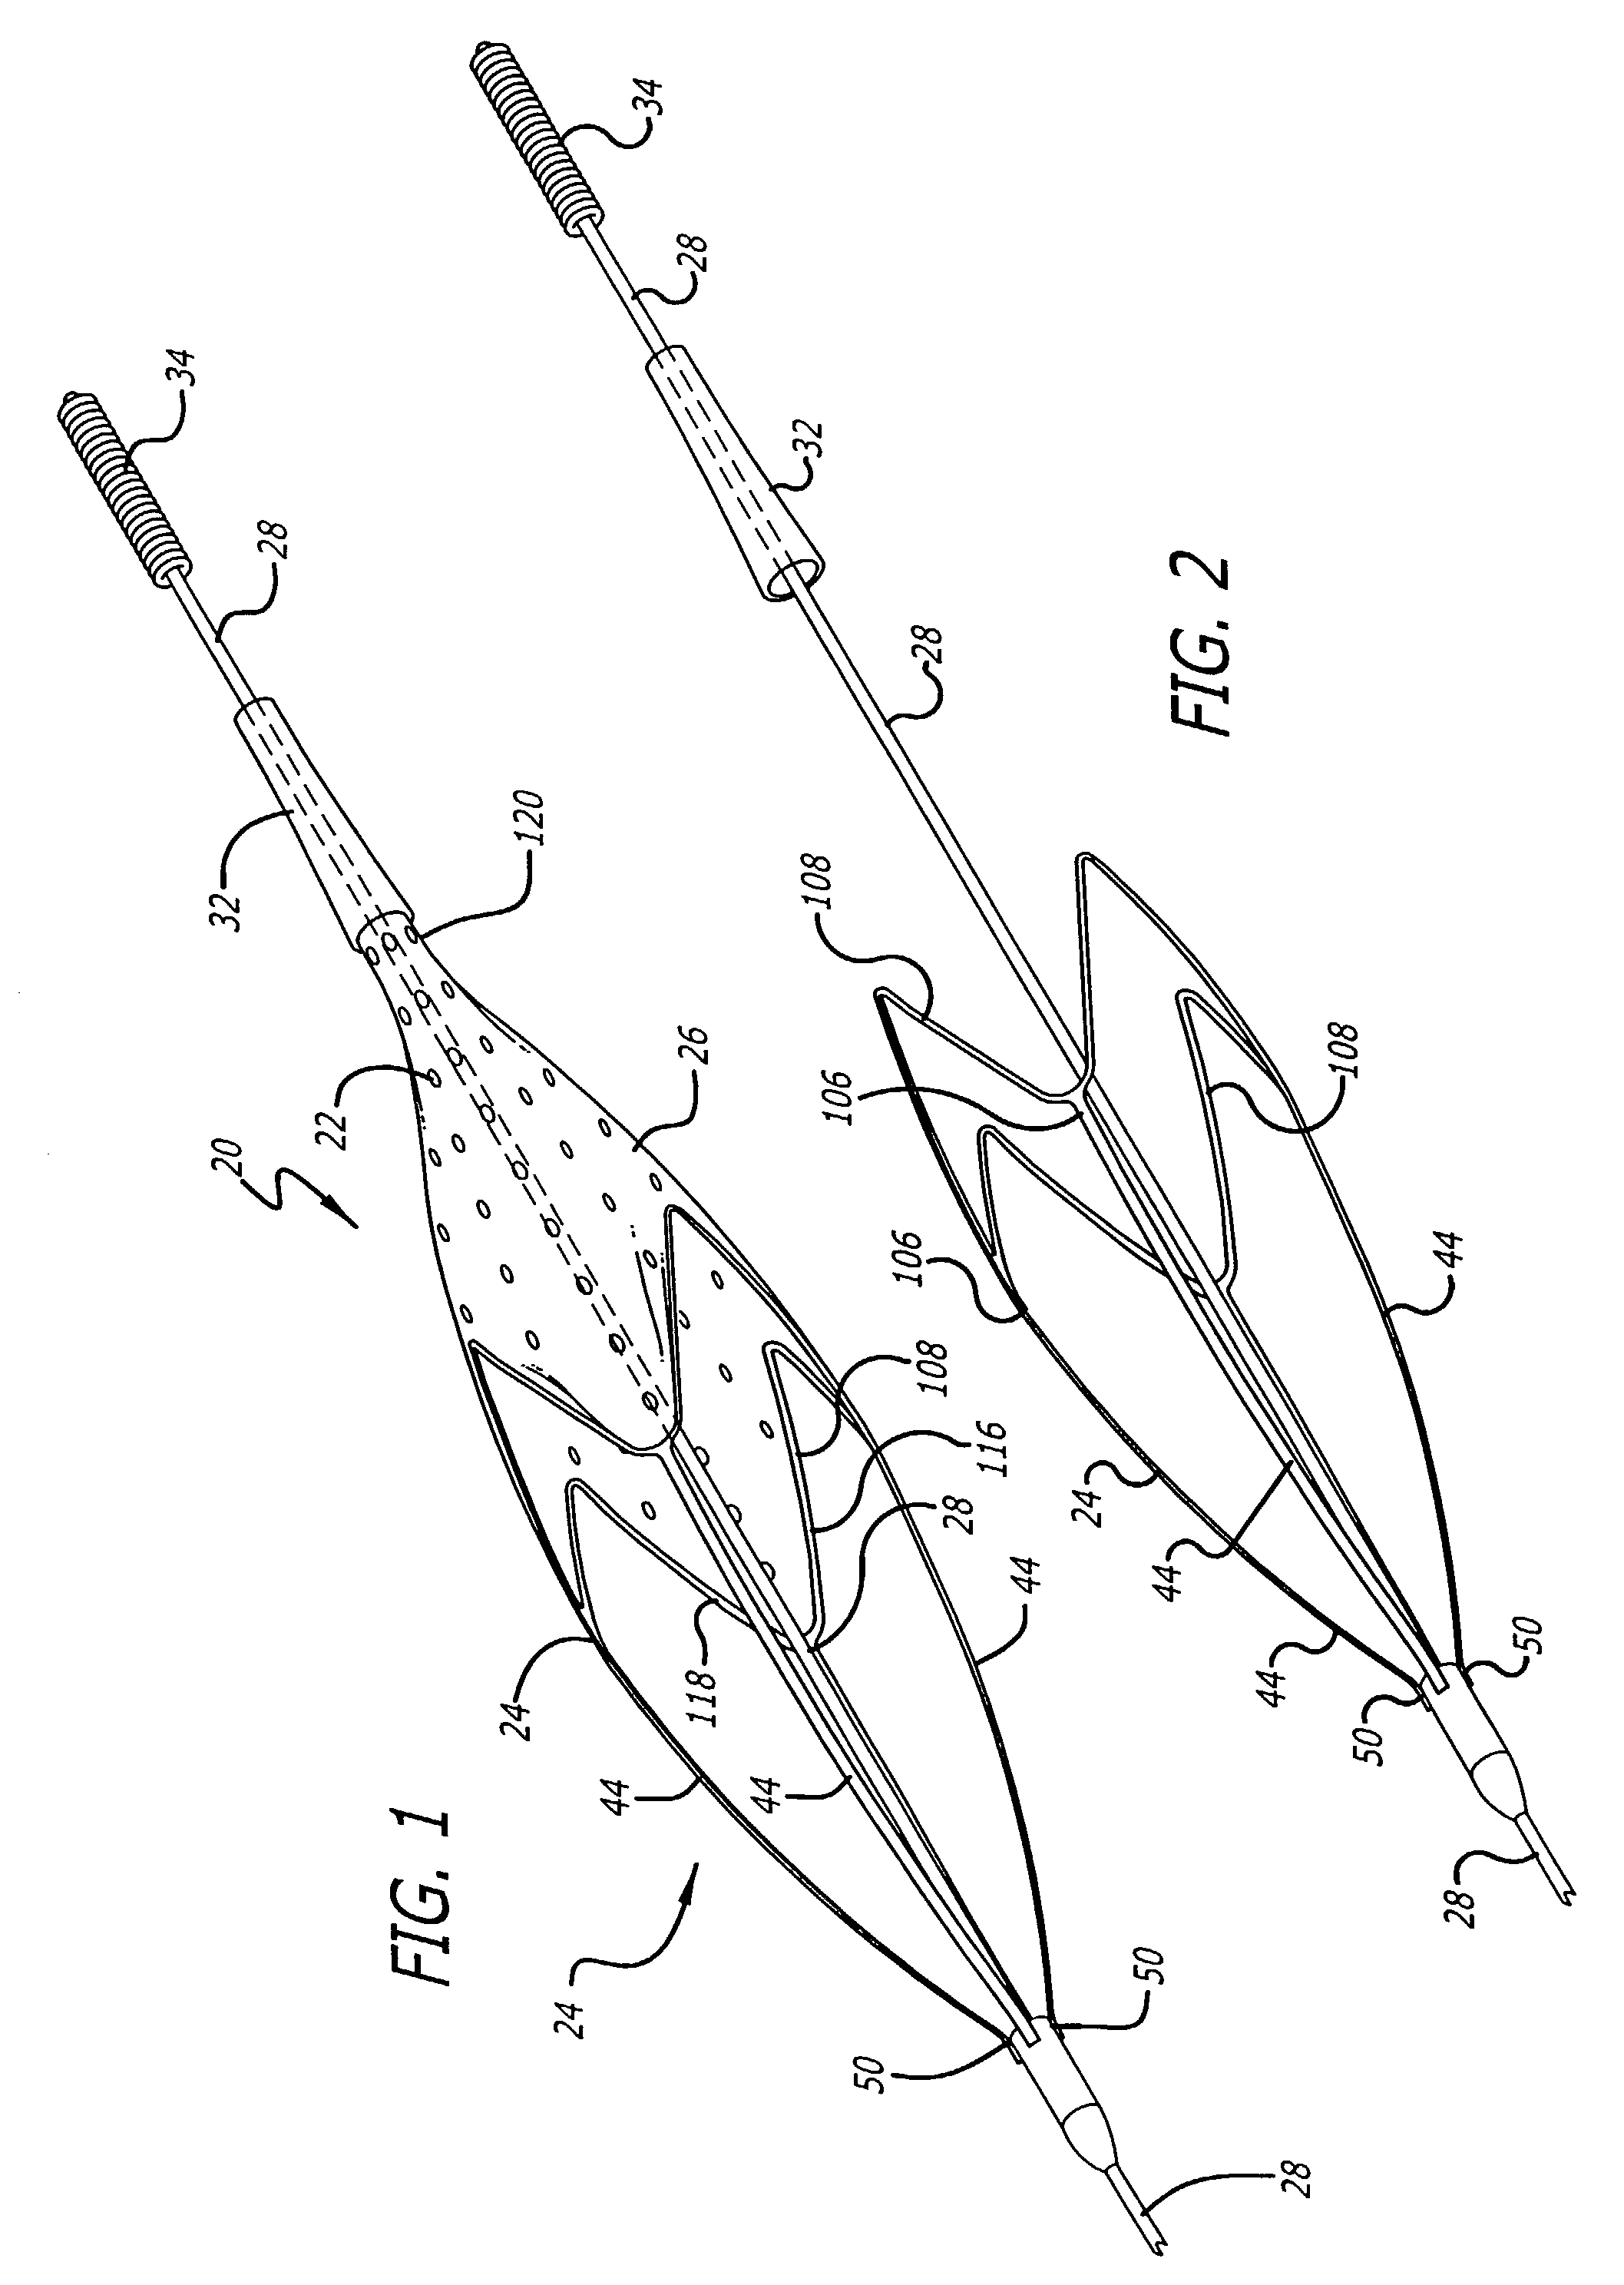 Support structures for embolic filtering devices